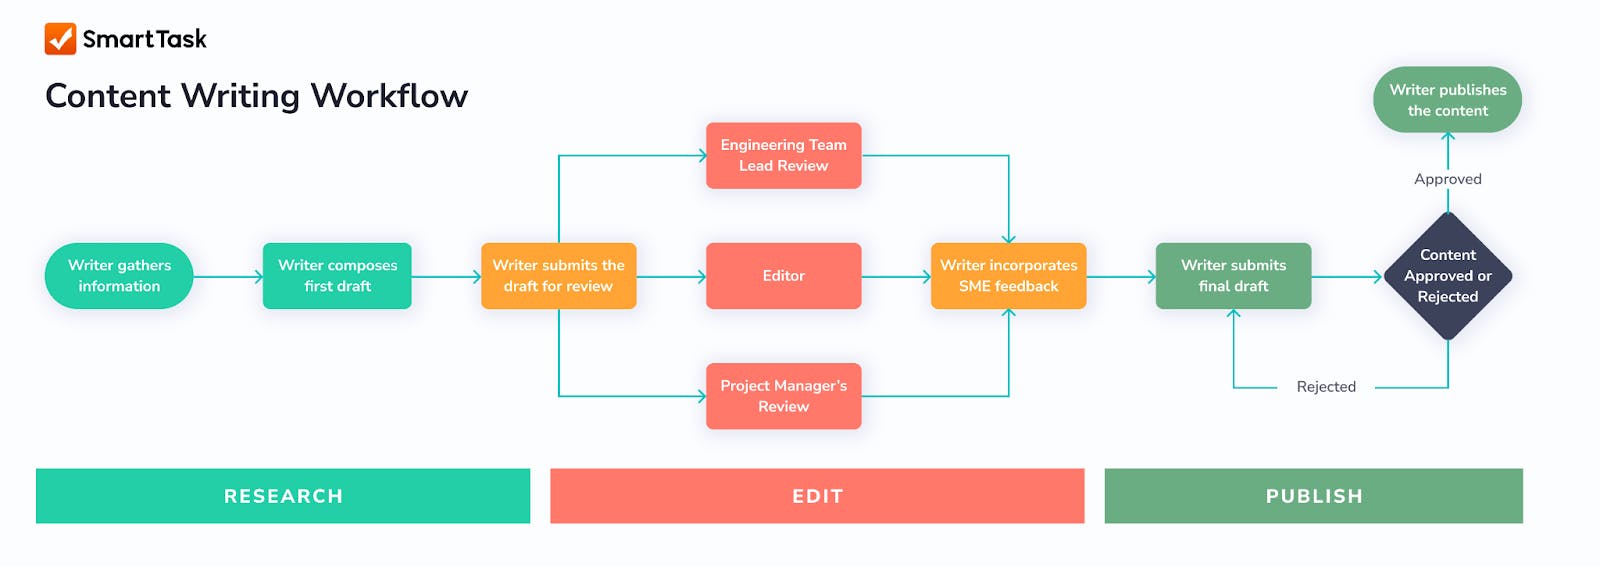 Content Writing Workflow